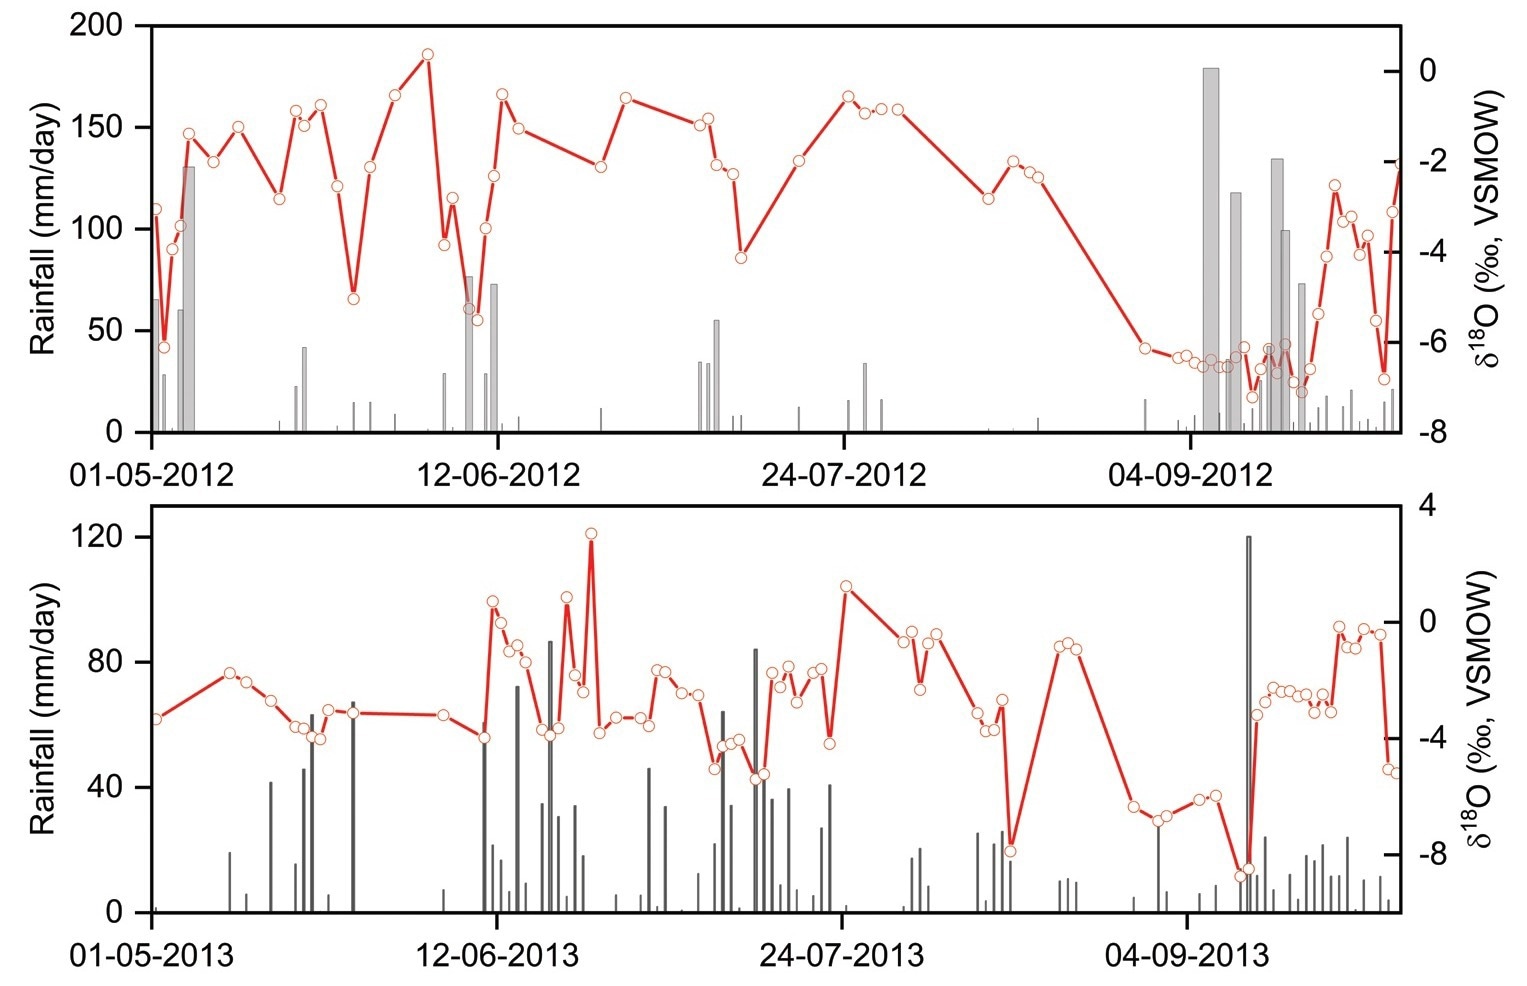 Time series of daily rainfall and d18O in Port Blair over years 2012 (top) and 2013 (bottom). Black bars represent rain gauge data and red line is the corresponding d18O record. An inverse correlation between rainfall and d18O is apparent for 2012, illustrating the “amount effect” (Chakraborty et al.).